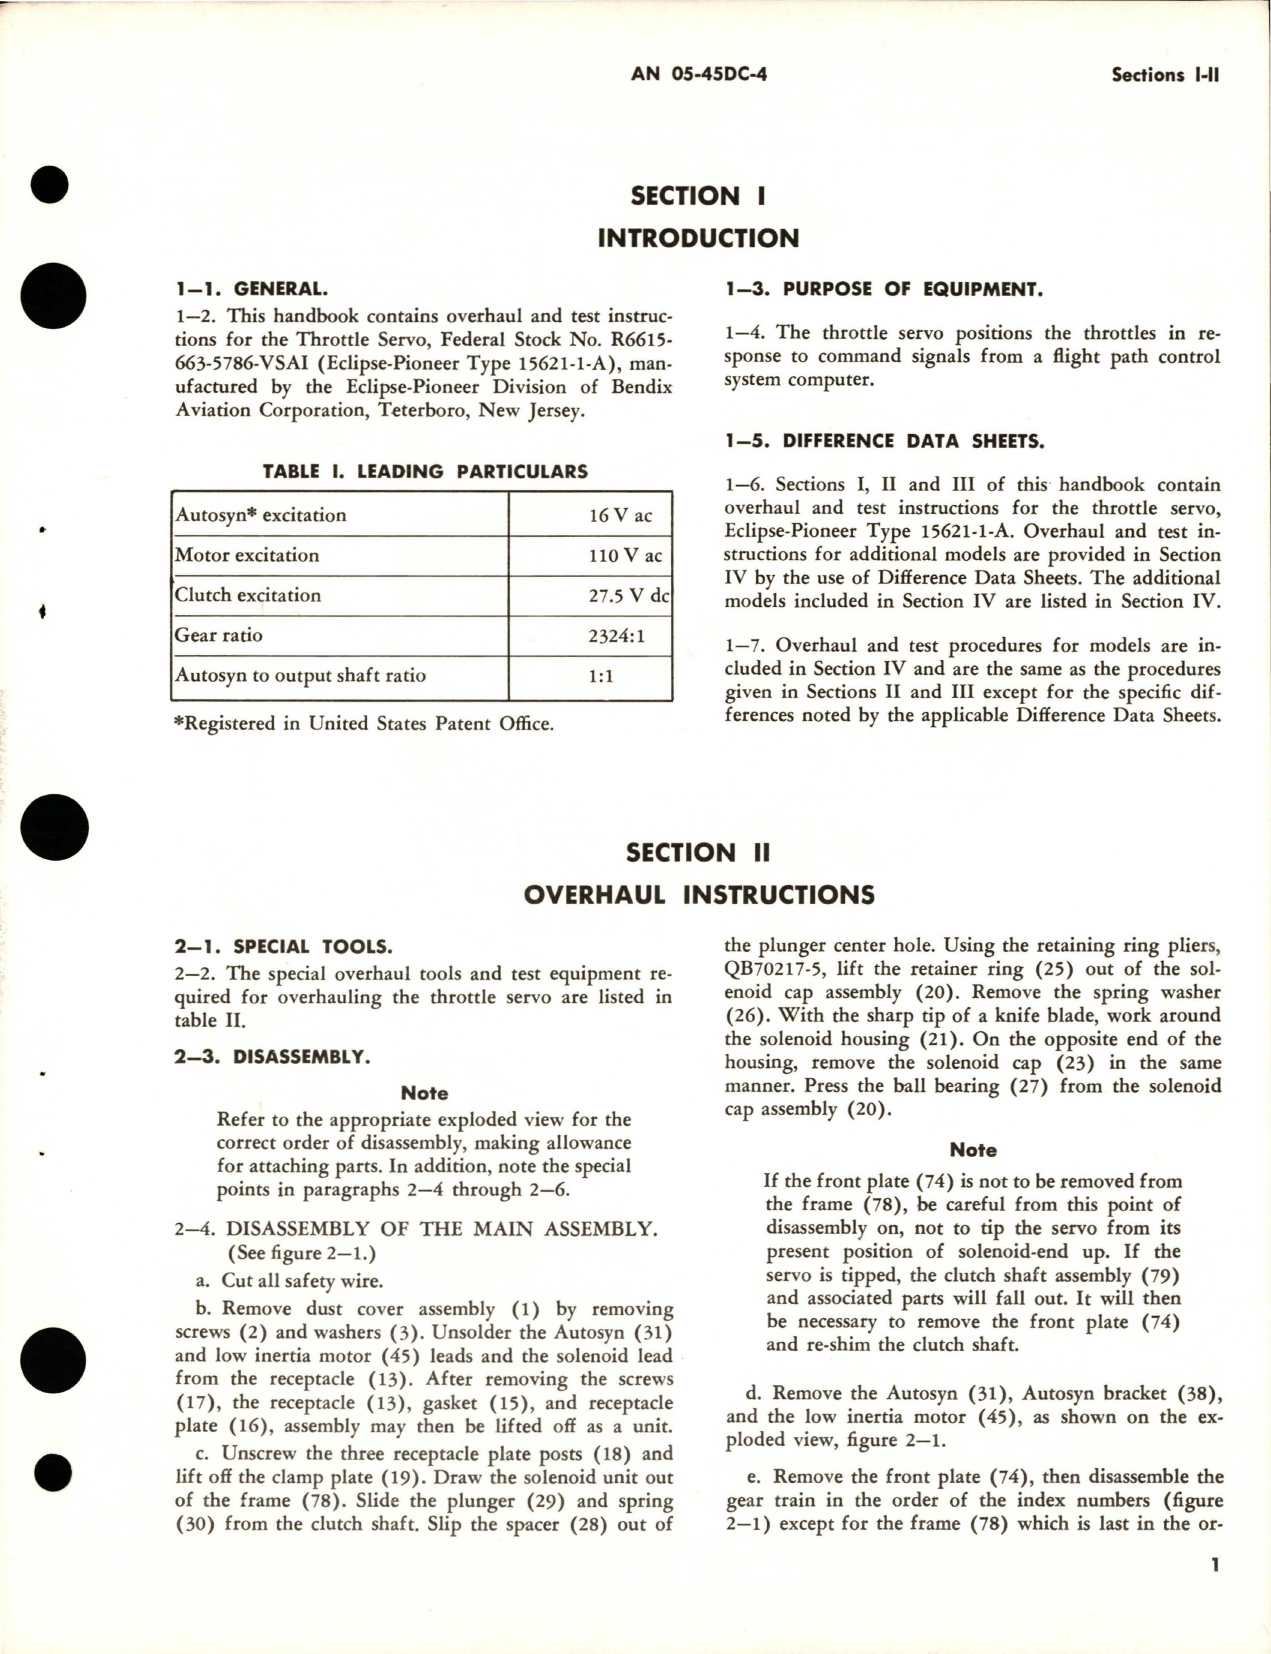 Sample page 5 from AirCorps Library document: Overhaul Instructions for Throttle Servo - Parts 15621-1-A, 15650-1-A and Trim Tab Servo - Part 15622-1-A